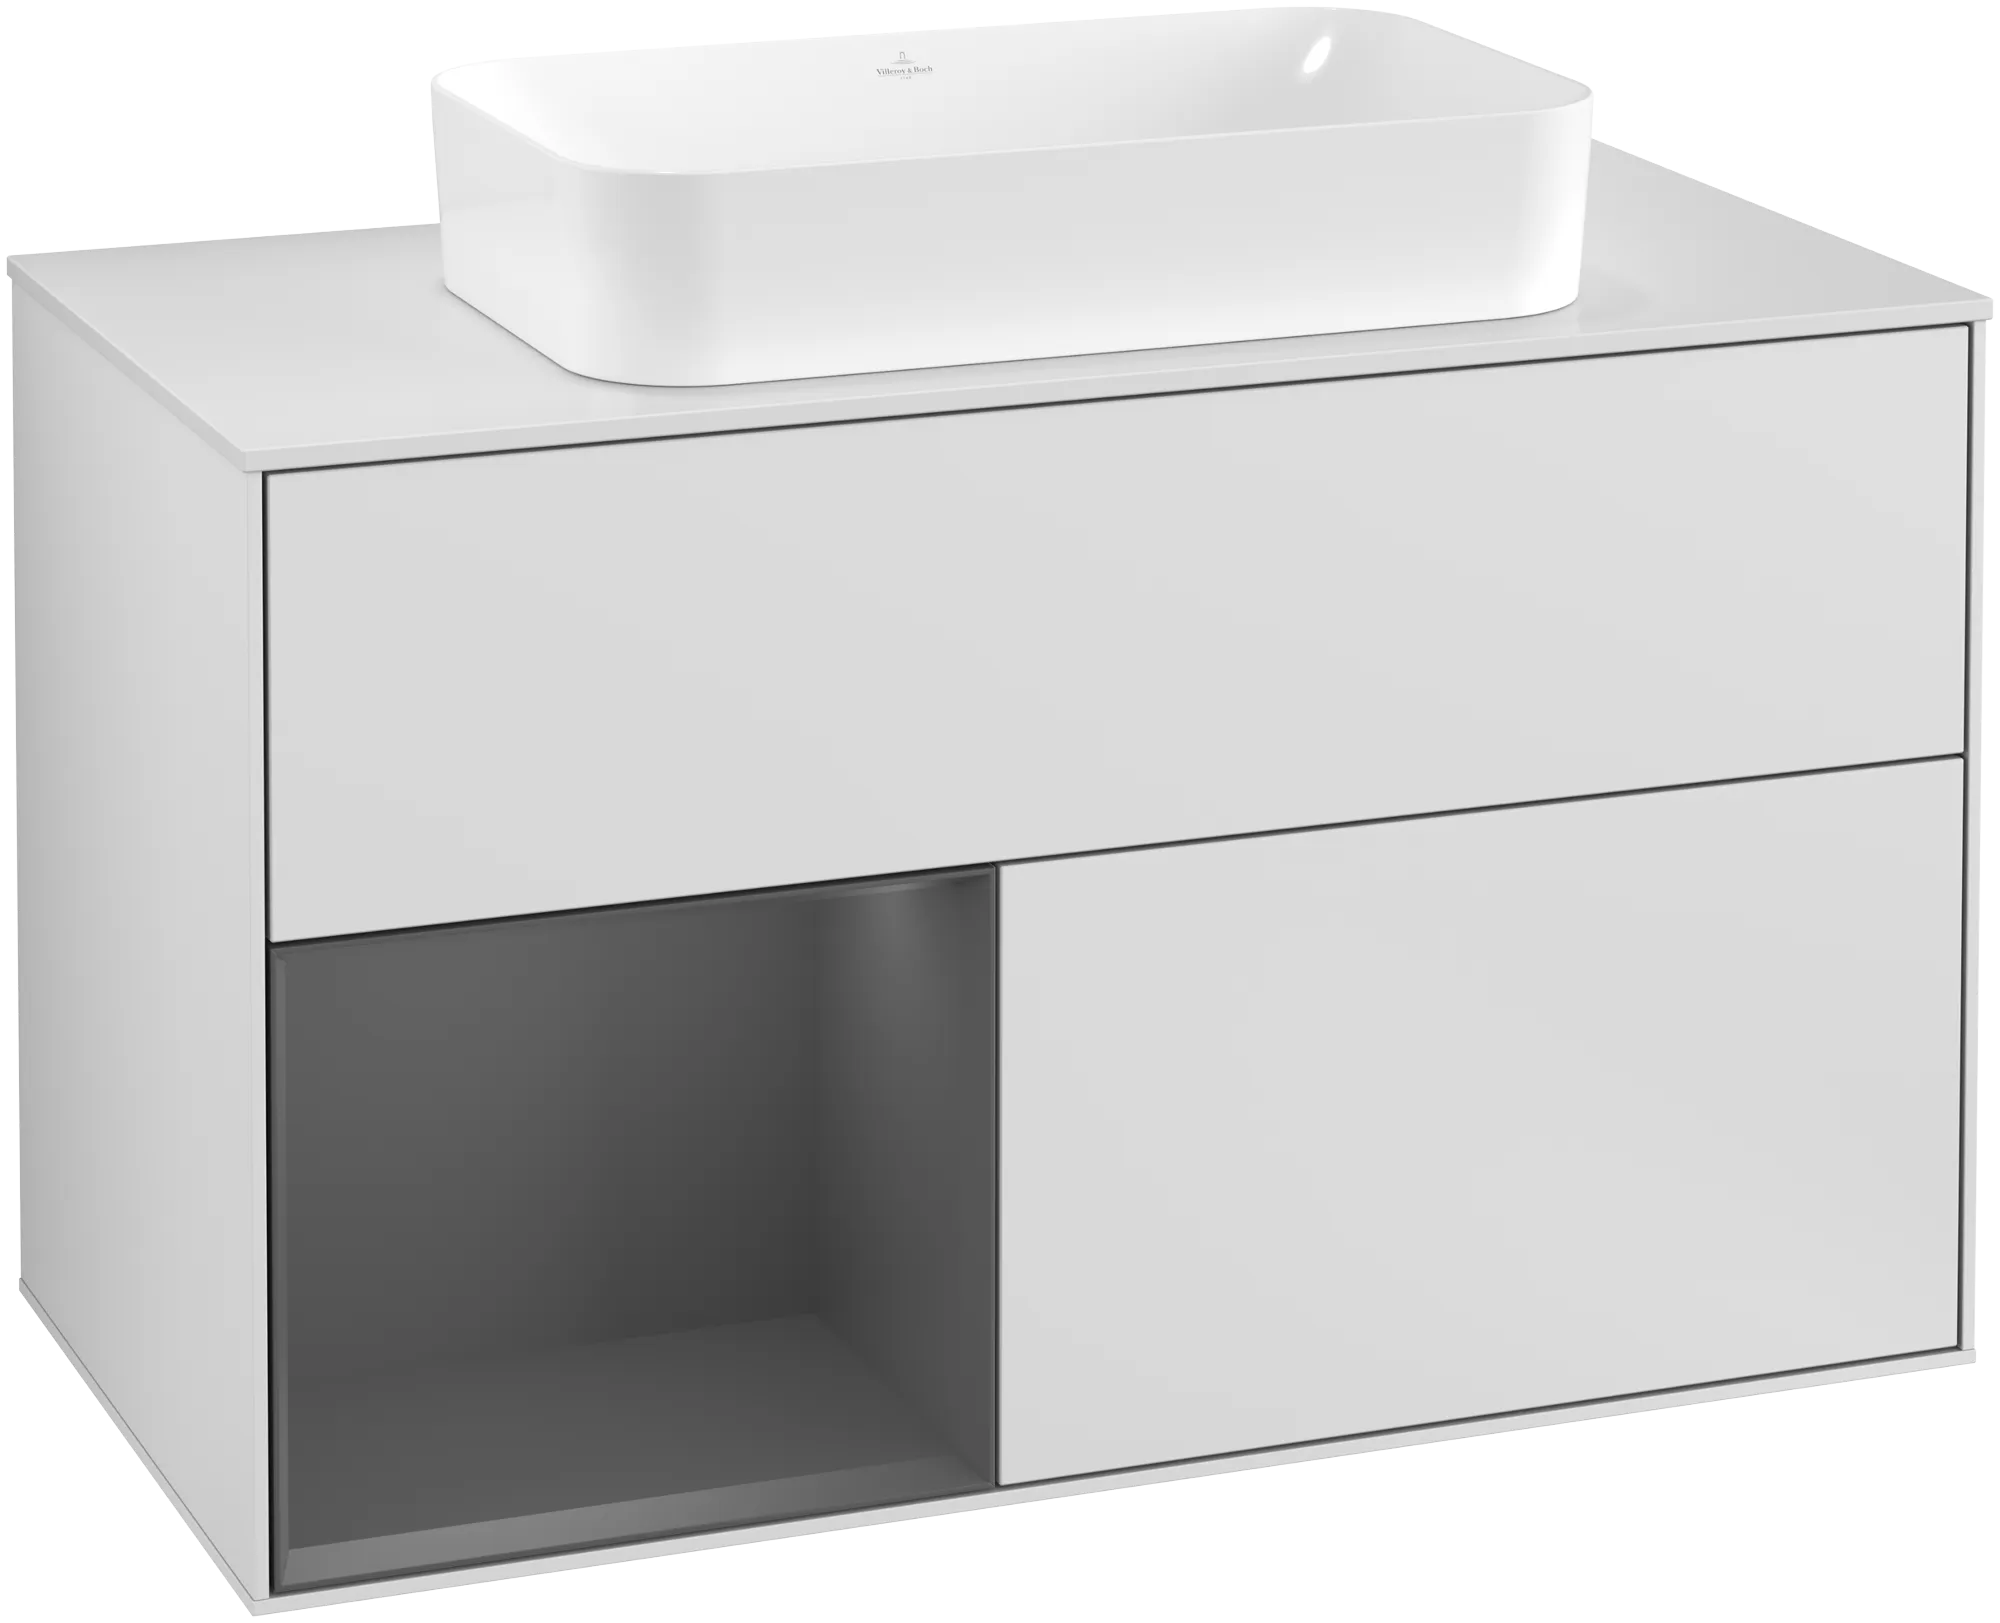 Obrázek VILLEROY BOCH Finion Vanity unit, with lighting, 2 pull-out compartments, 1000 x 603 x 501 mm, White Matt Lacquer / Anthracite Matt Lacquer / Glass White Matt #G241GKMT